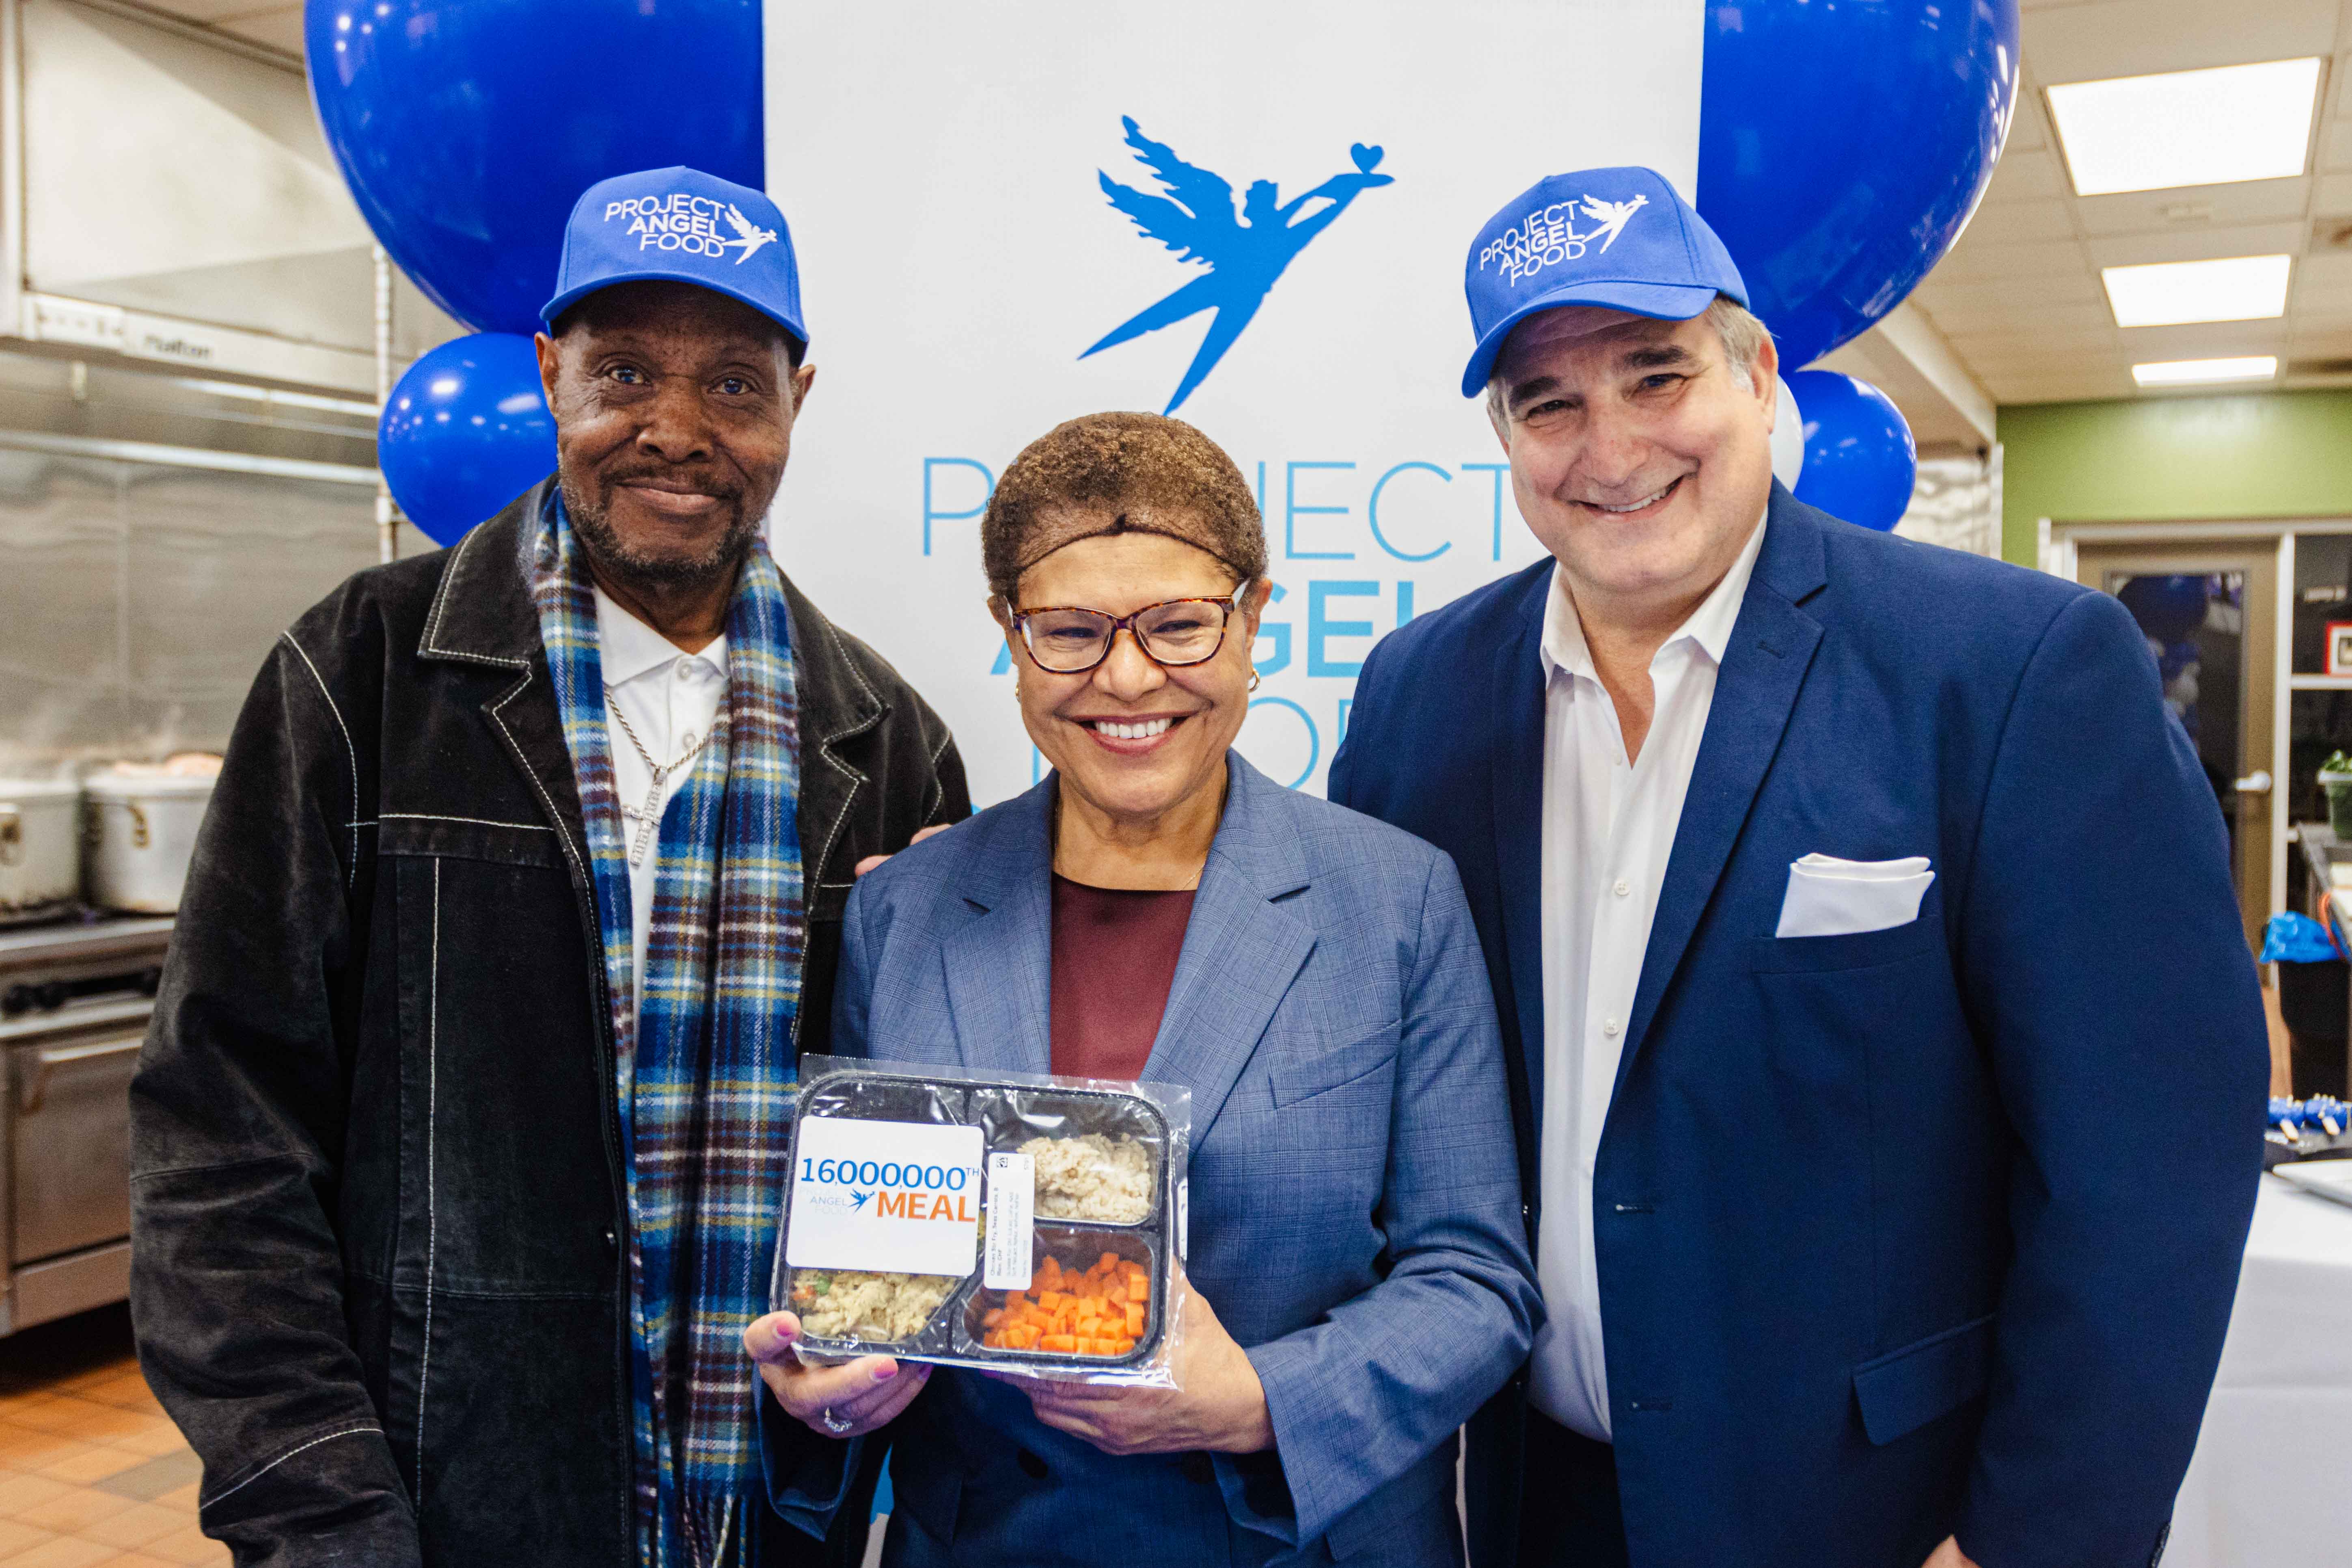 (From left to right) Project Angel Food client Leon Williams, Los Angeles Mayor Karen Bass, Project Angel Food CEO Richard Ayoub.